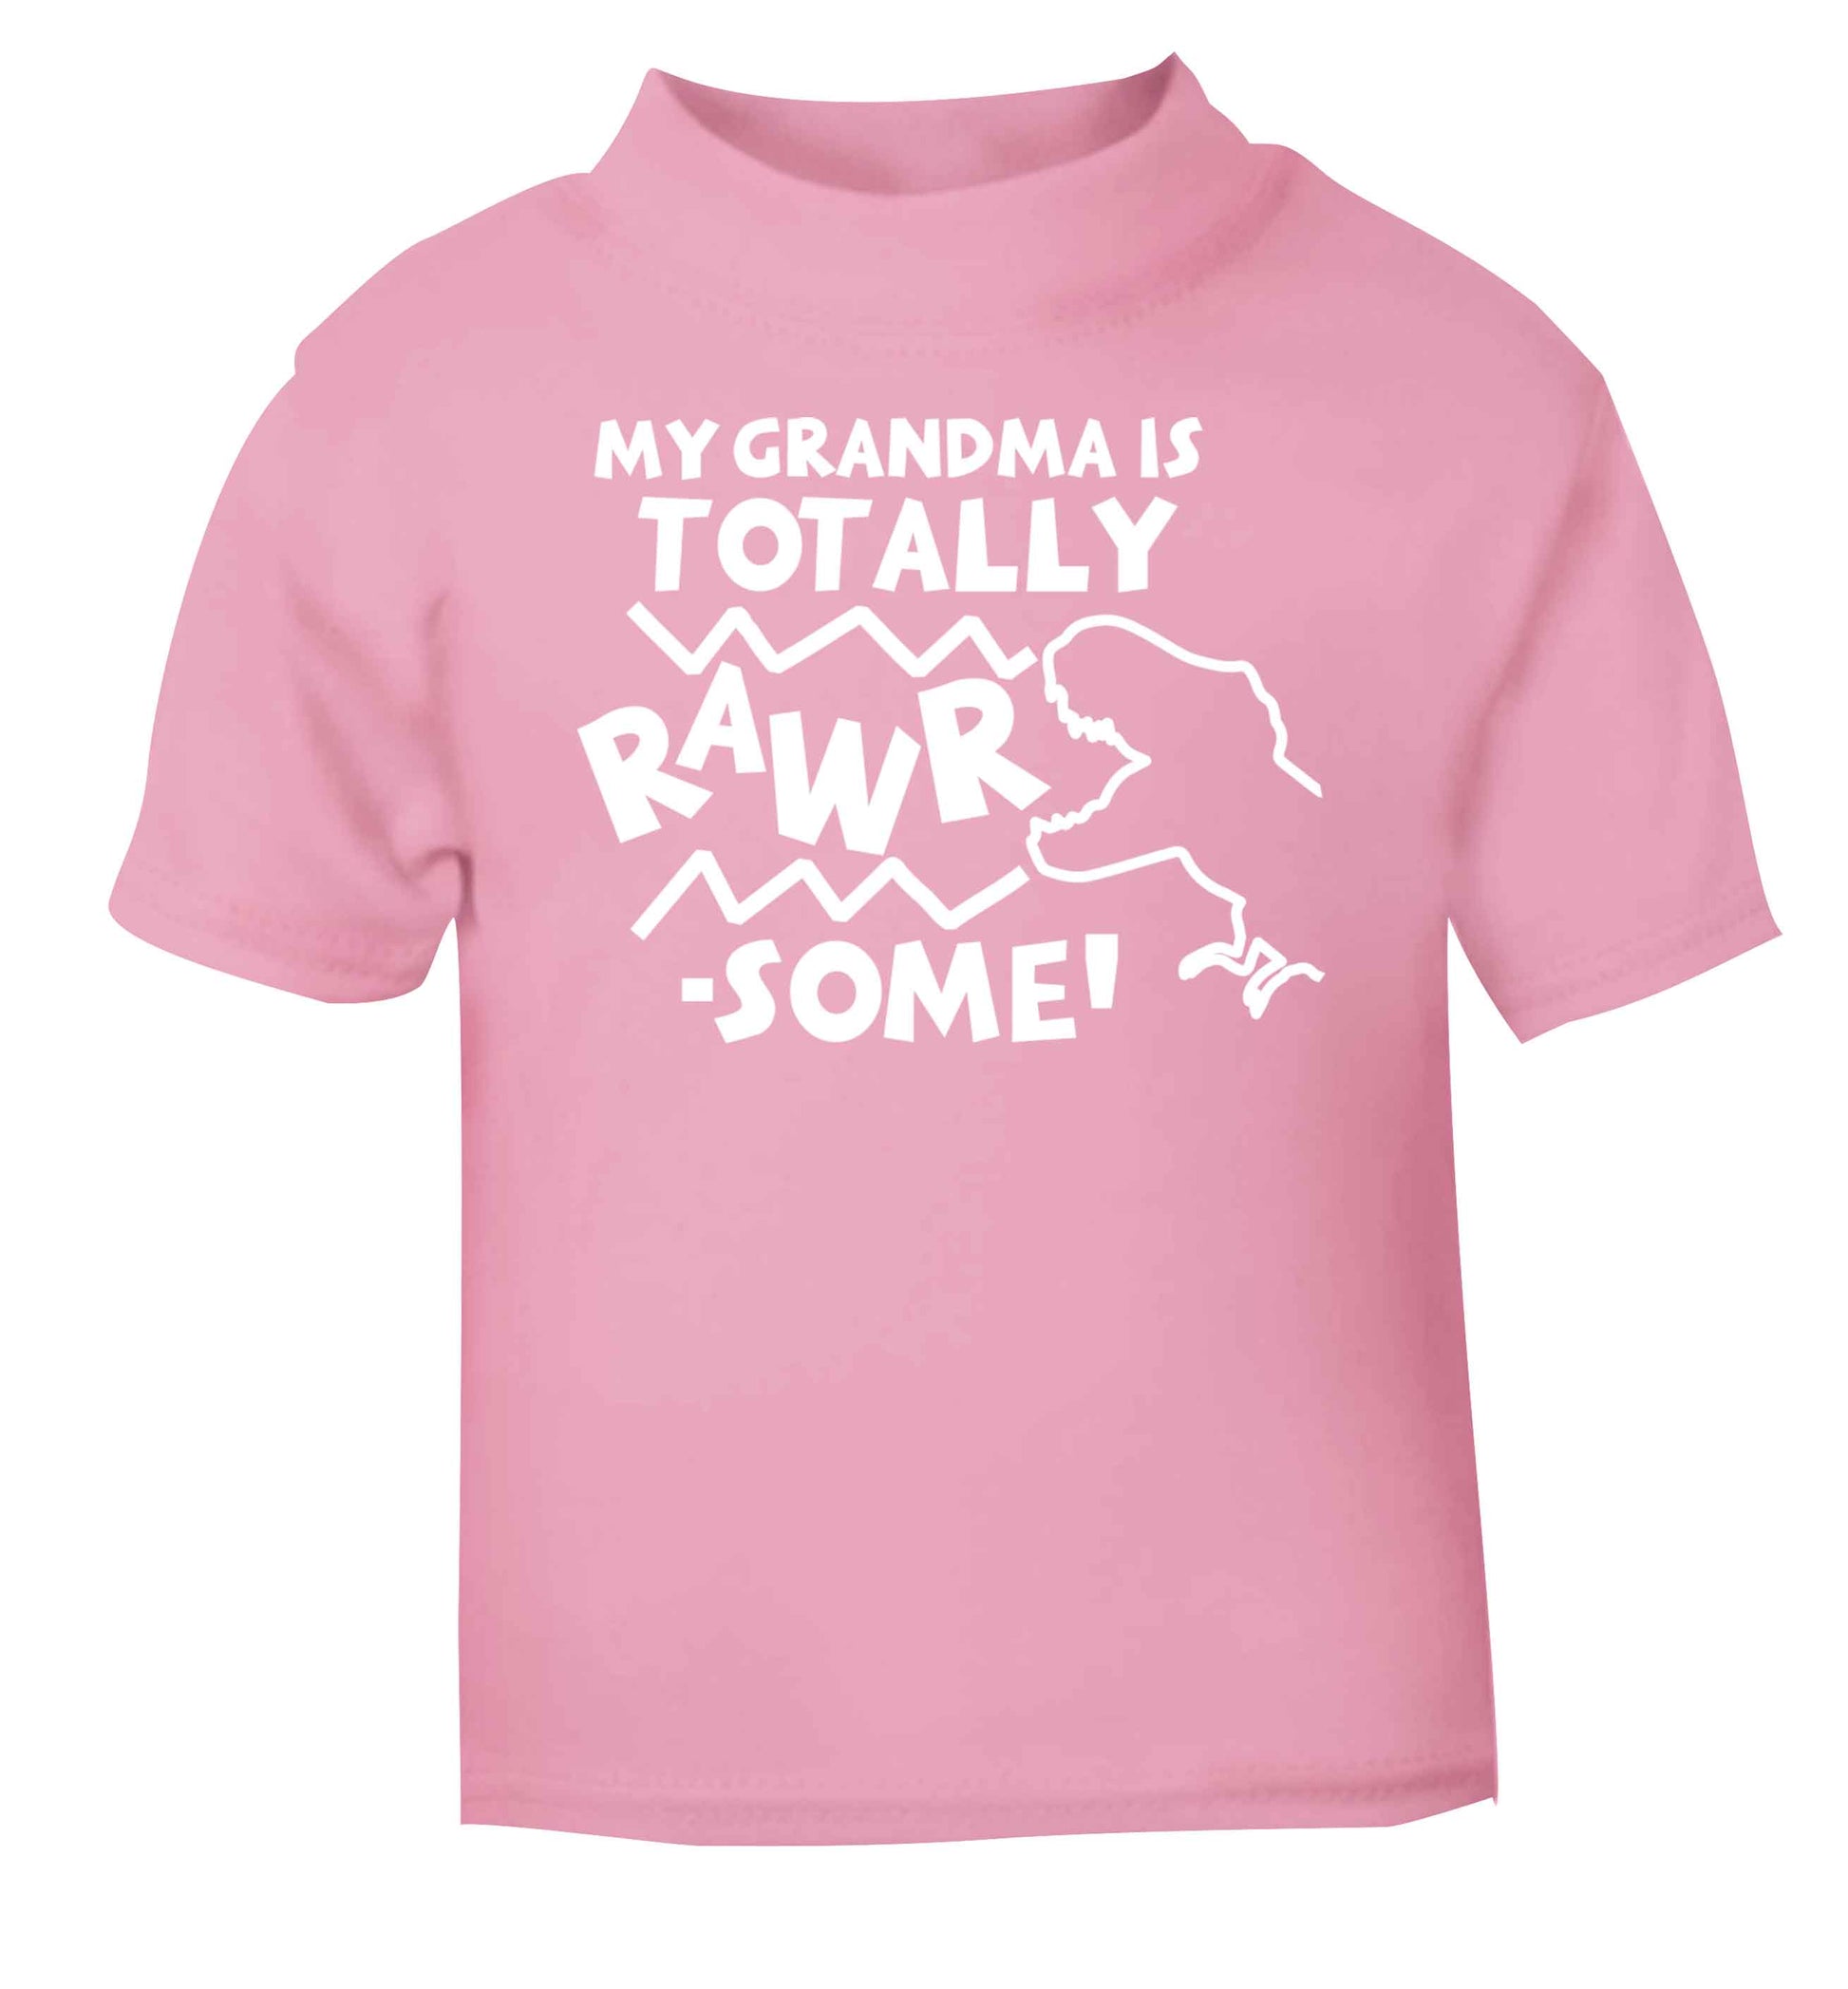 My grandma is totally rawrsome light pink baby toddler Tshirt 2 Years